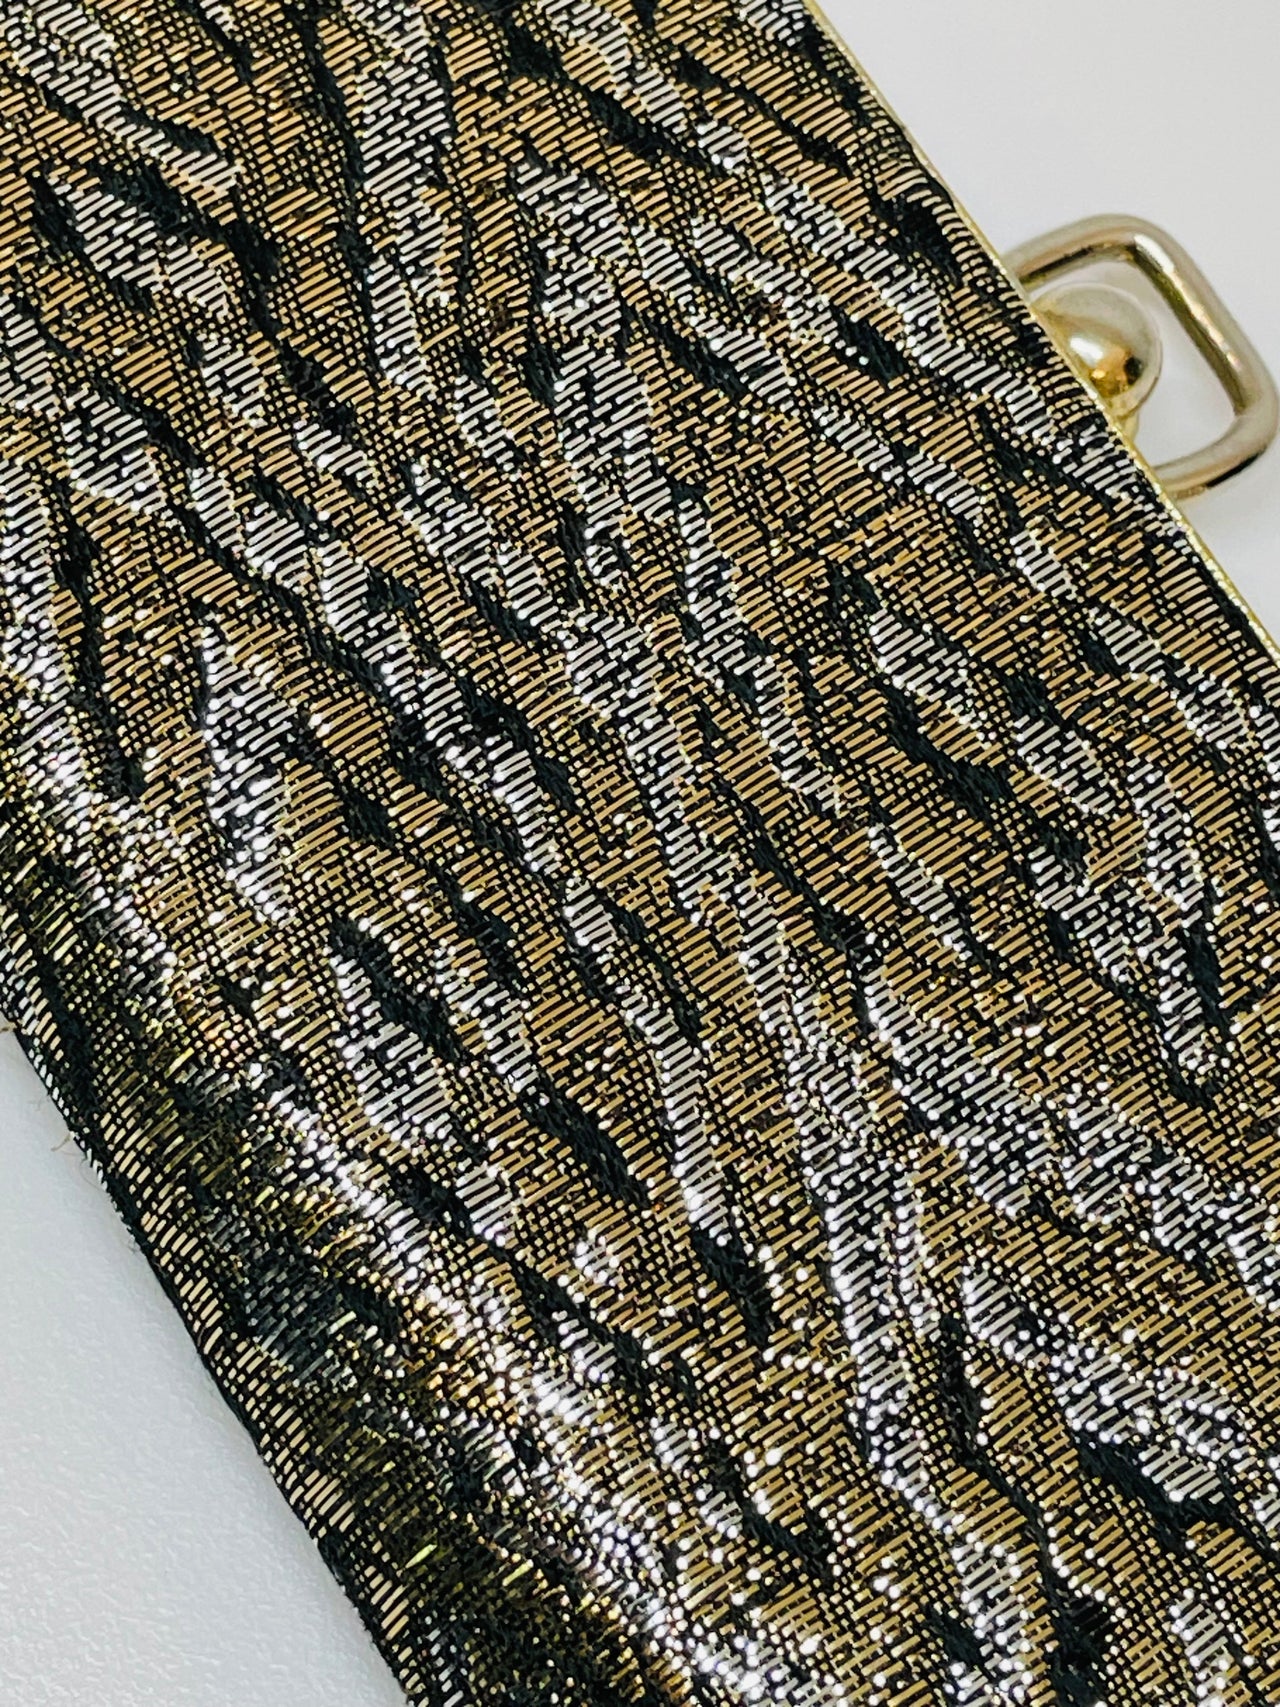 Black, Gold, and Silver Fabric Case Devil's Details 